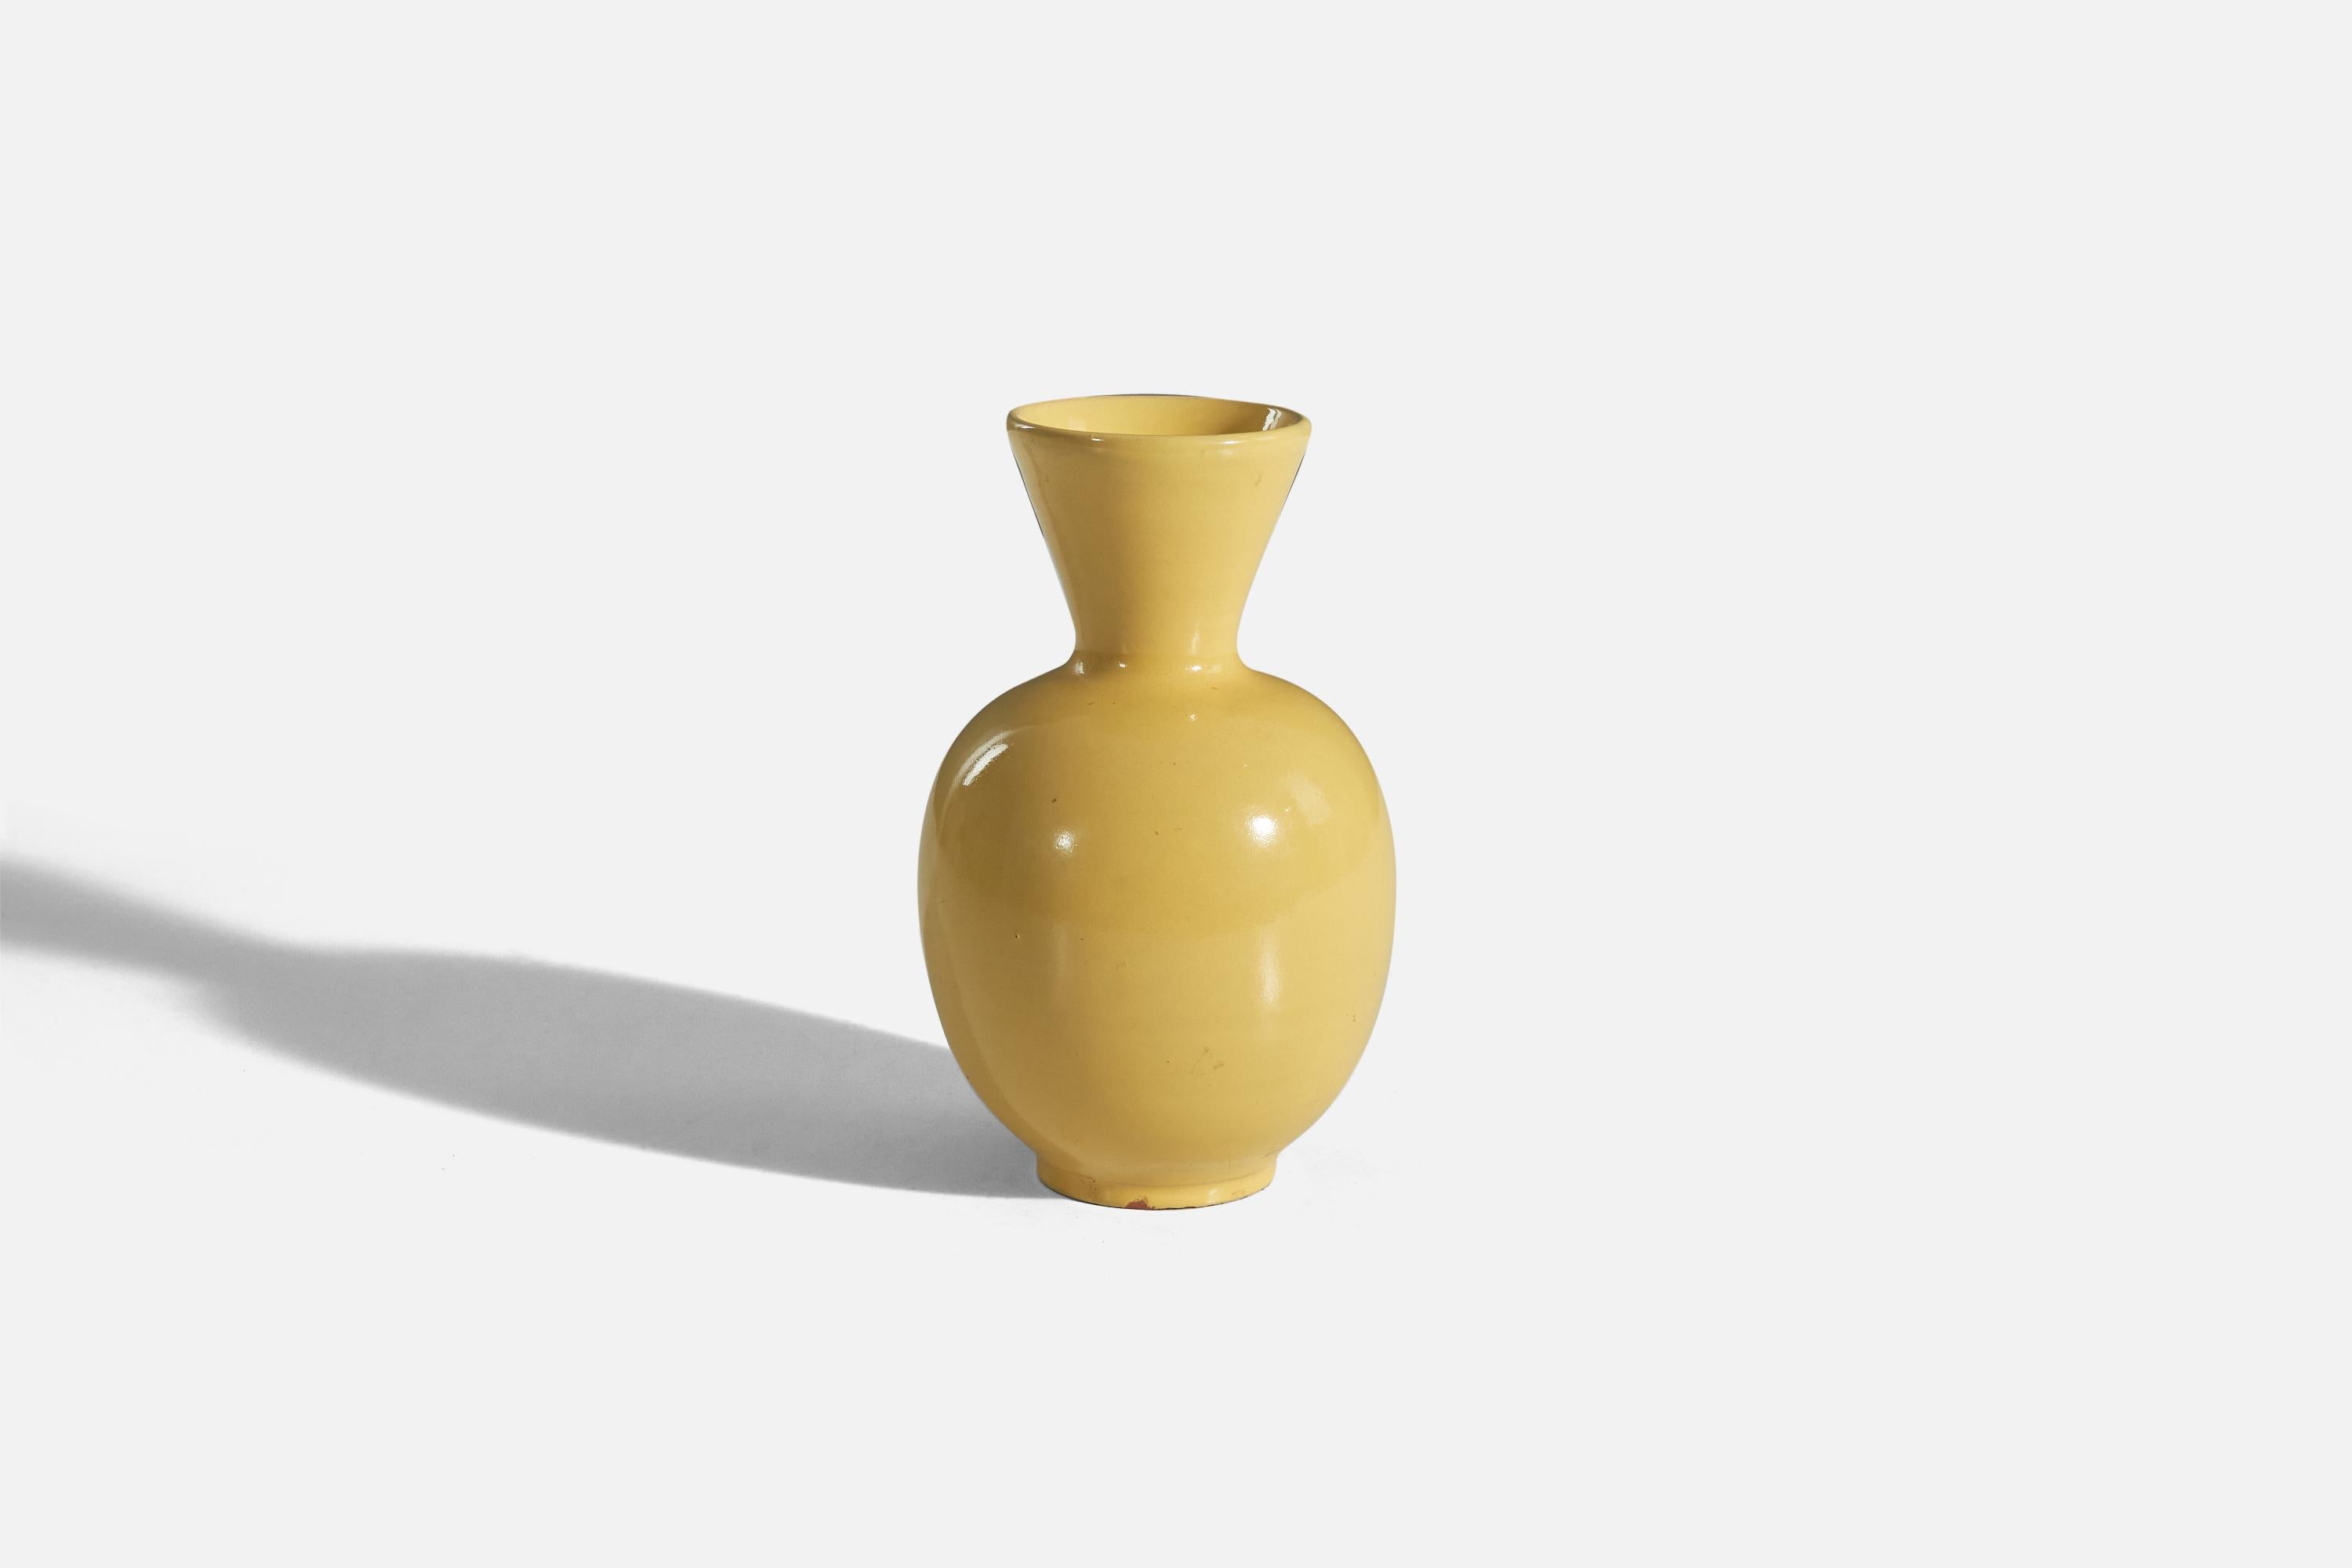 A yellow, glazed earthenware vase designed and produced by Upsala-Ekeby, Sweden, 1940s.

